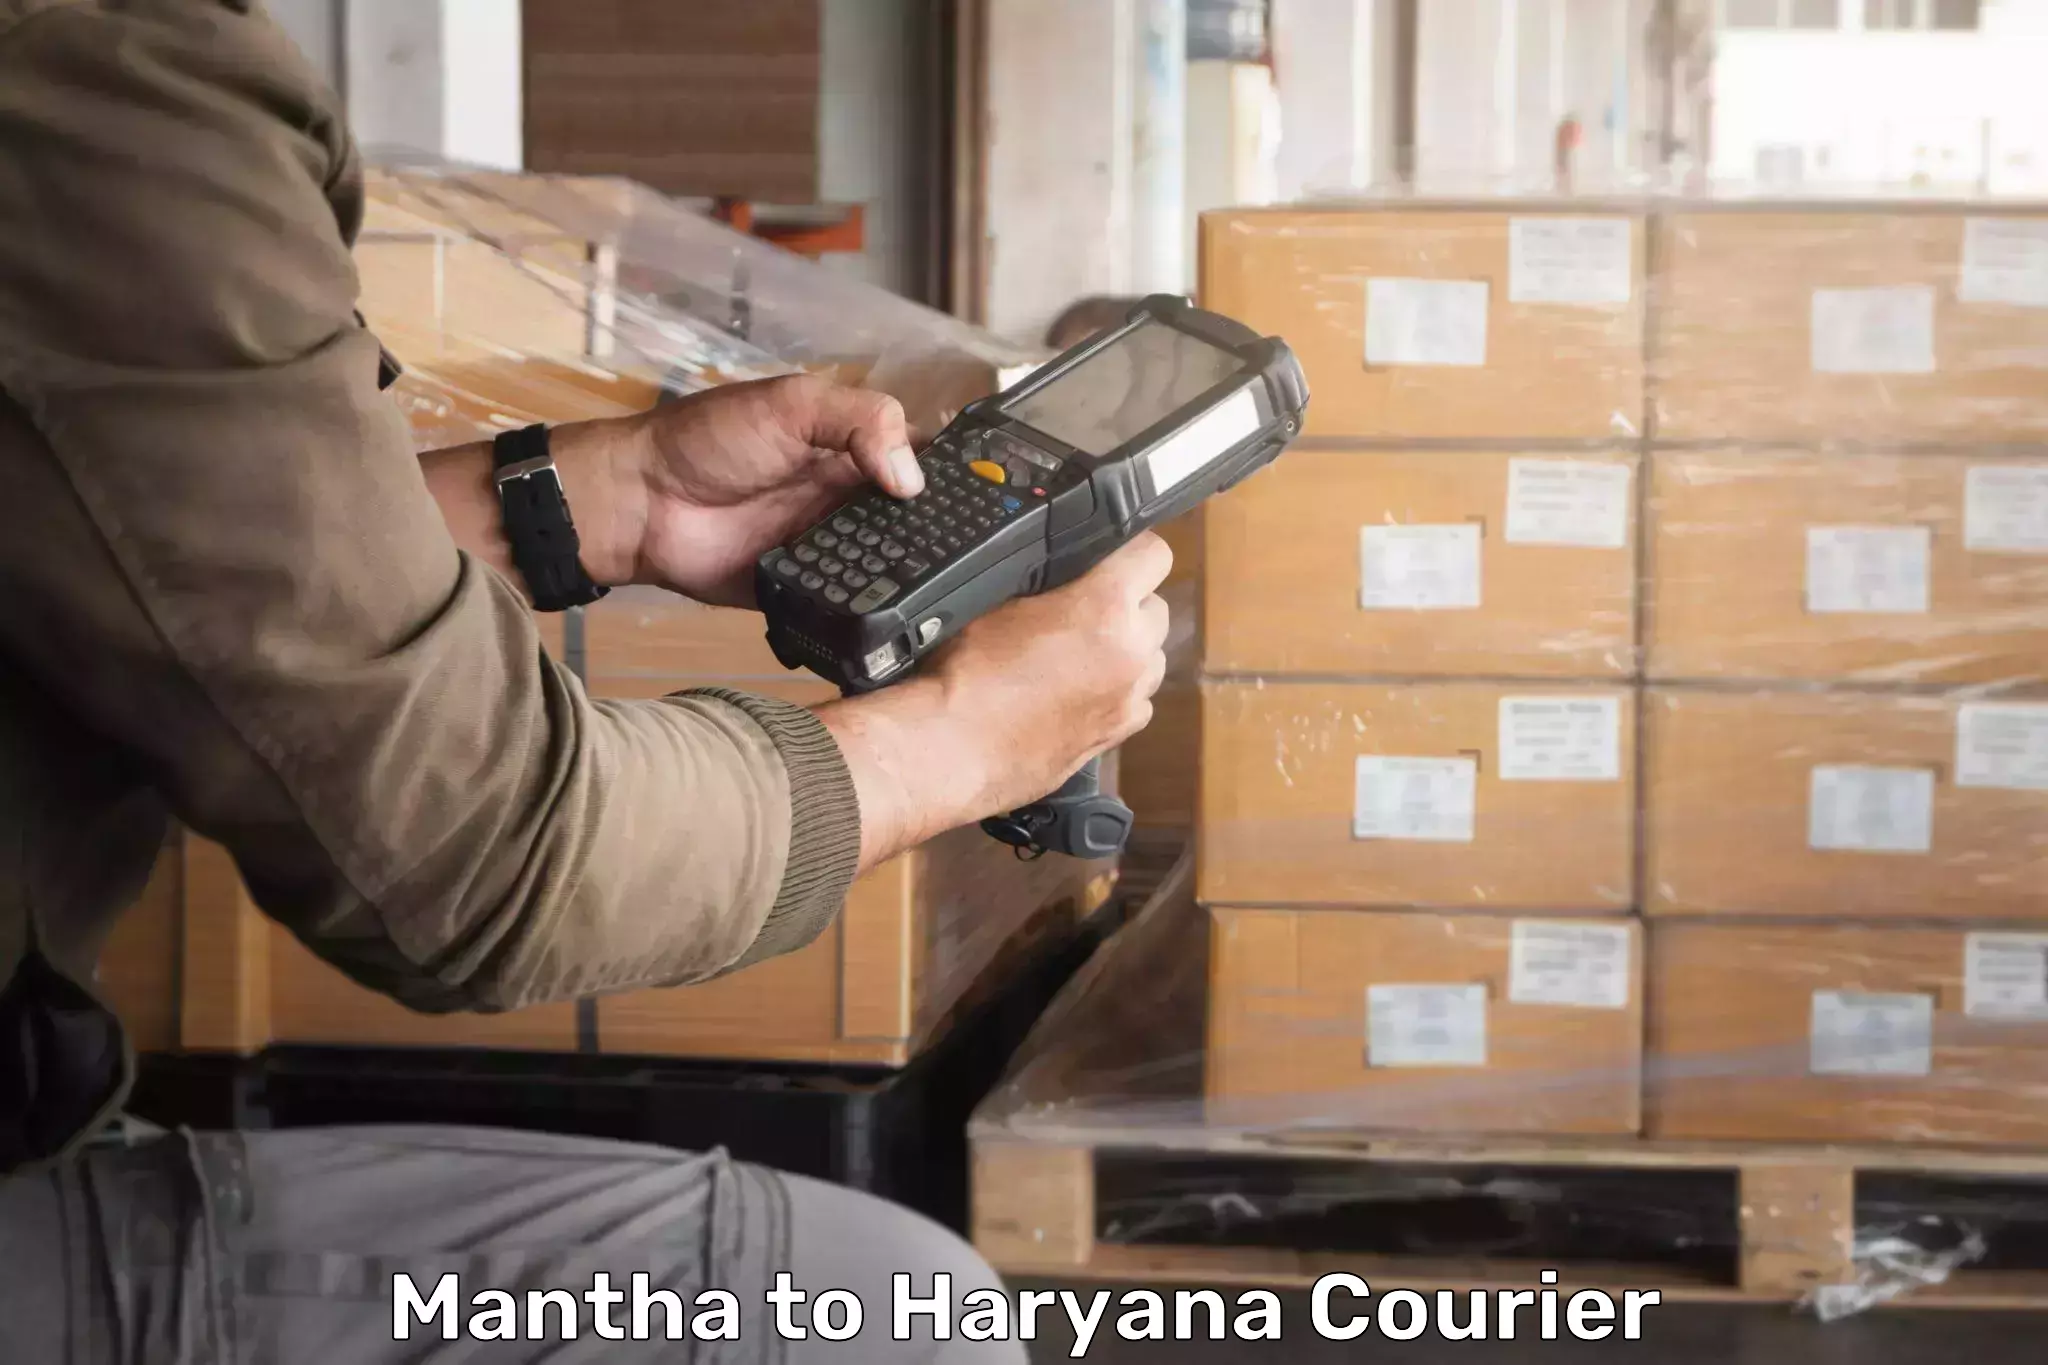 24-hour courier services Mantha to Chaudhary Charan Singh Haryana Agricultural University Hisar